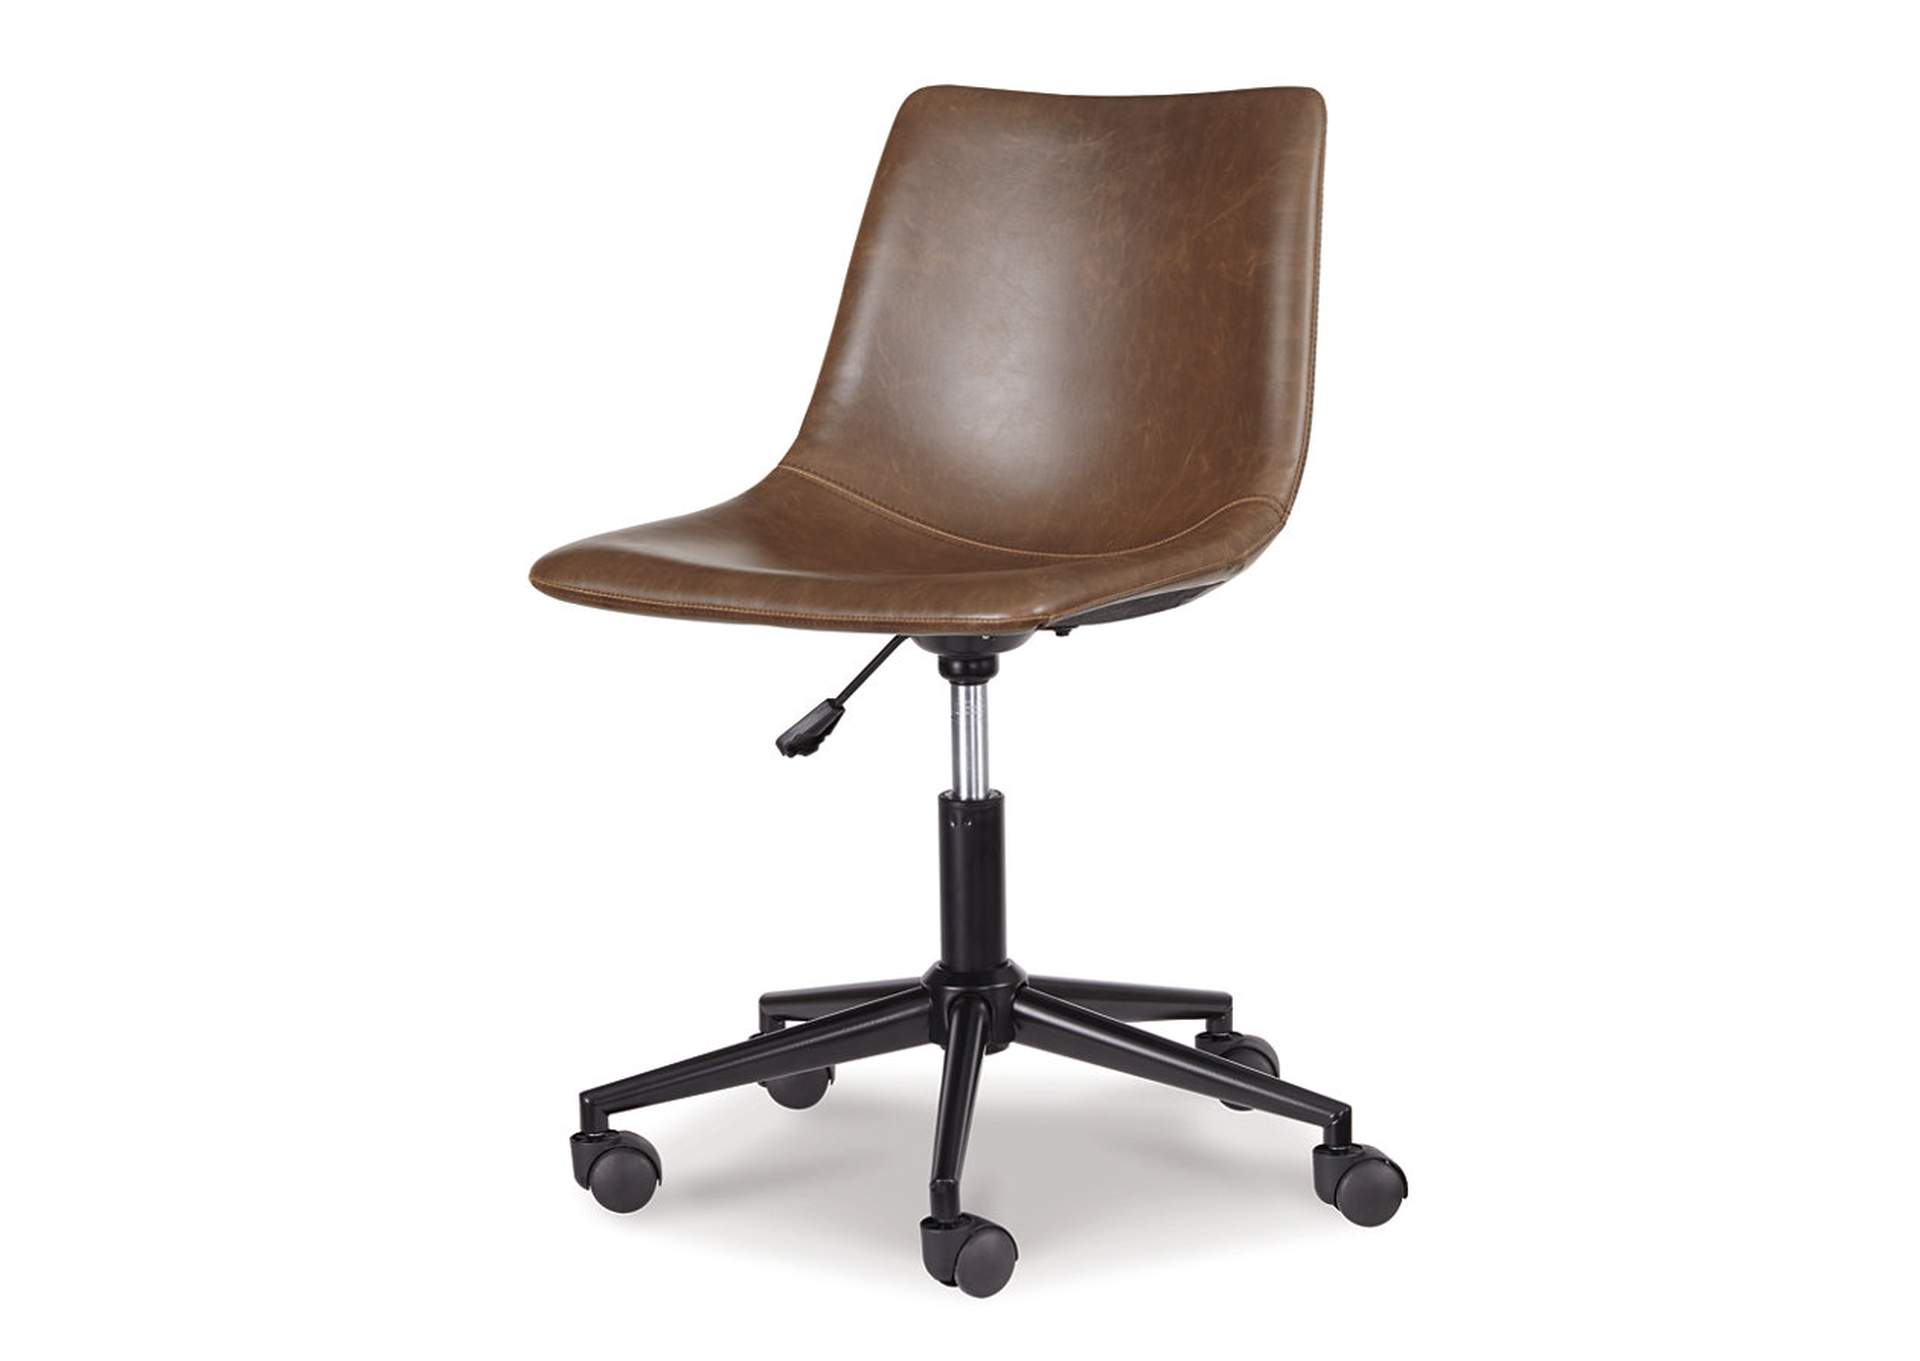 Office Chair Program Home Office Desk Chair,Direct To Consumer Express